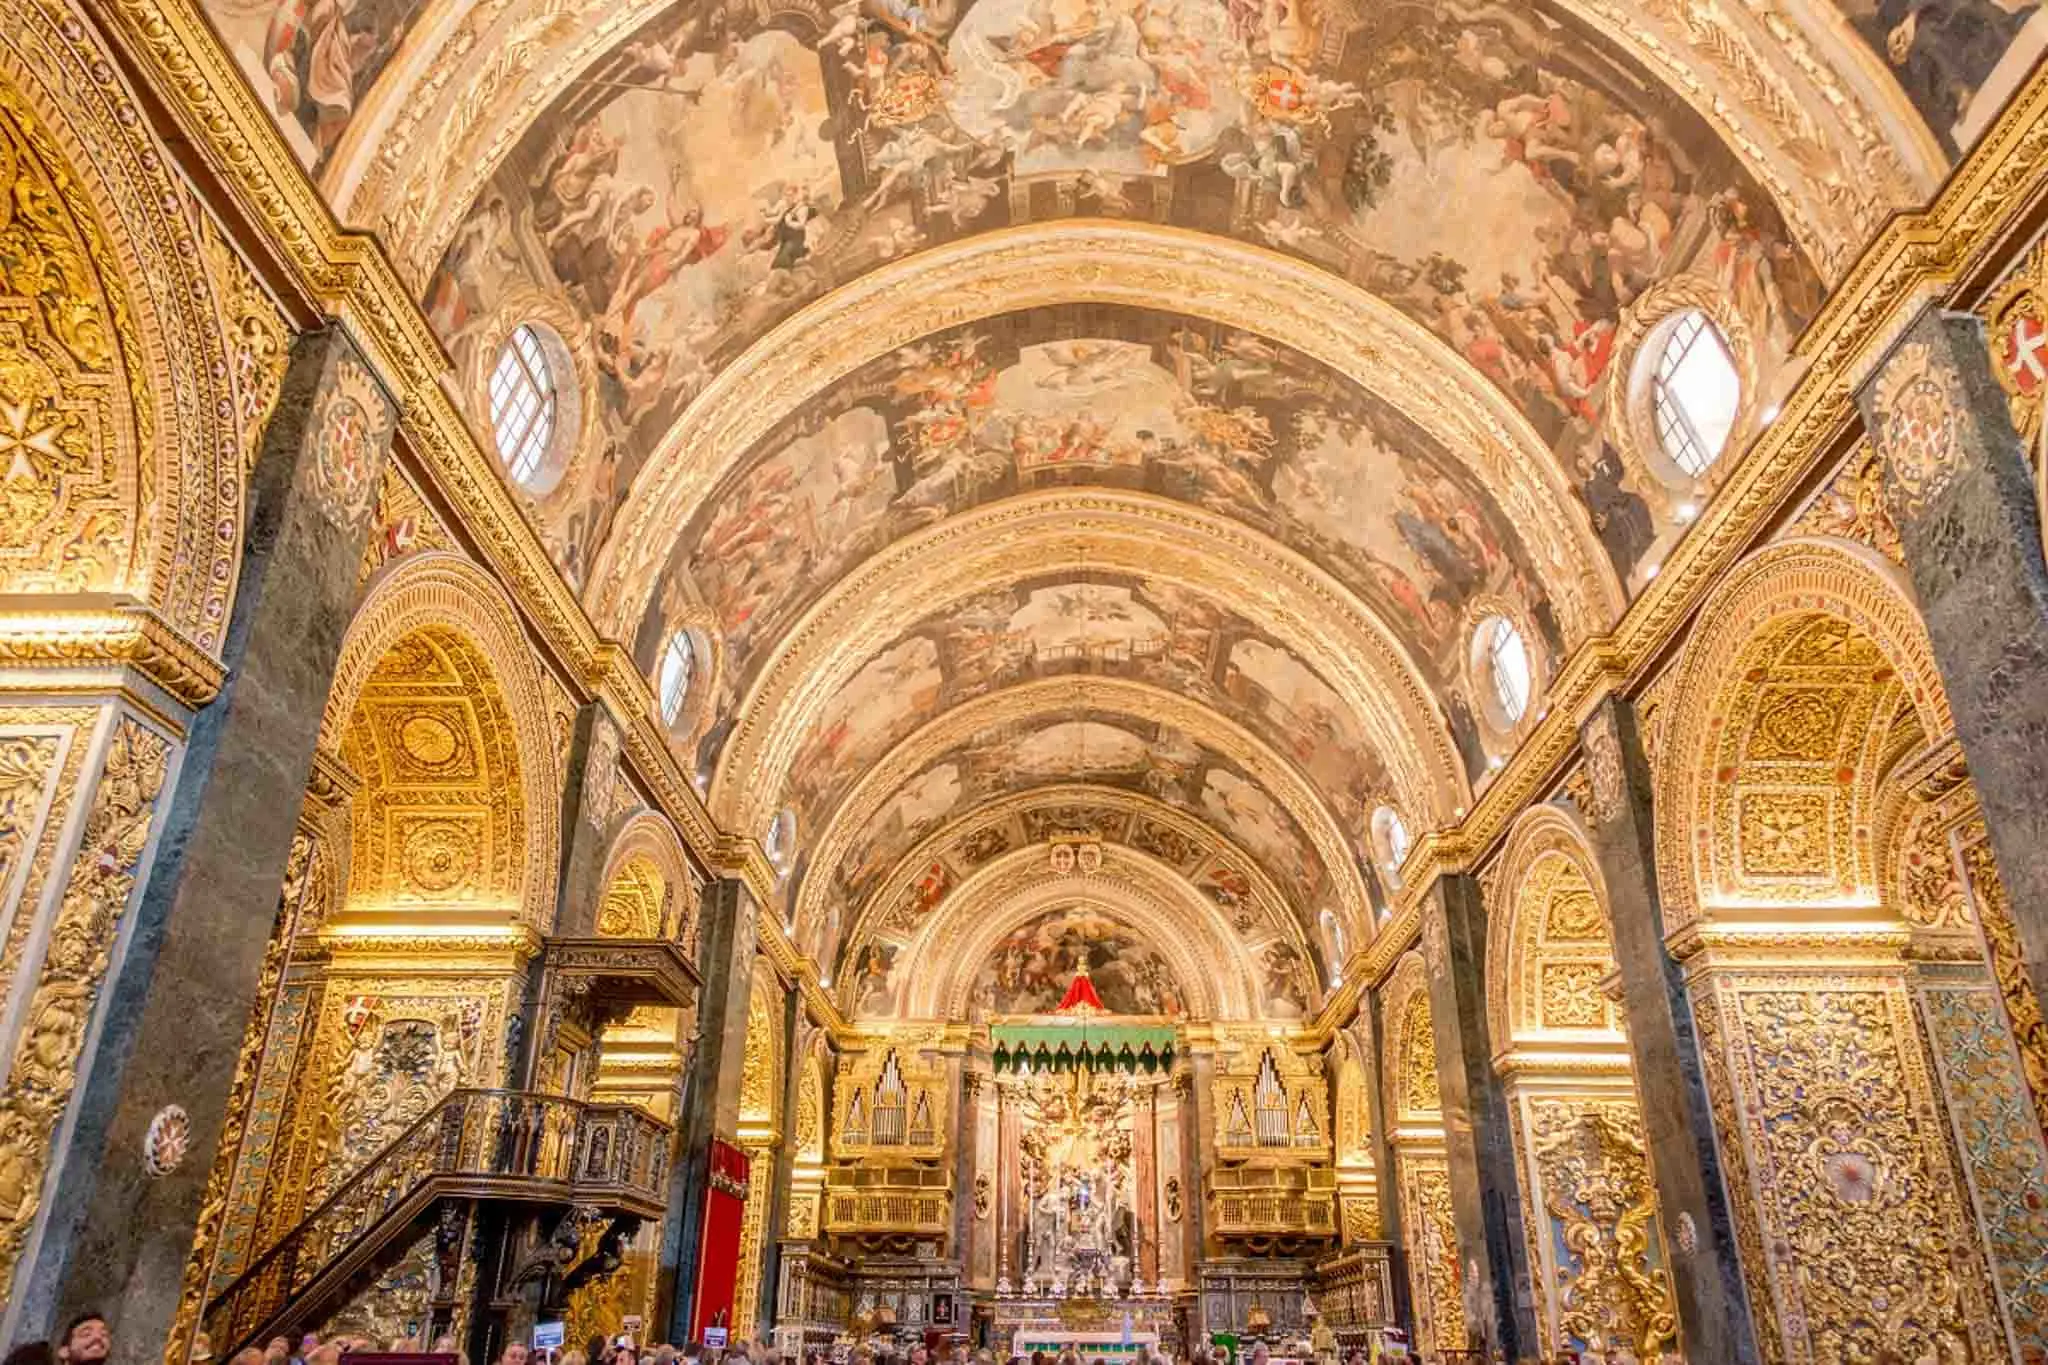 Painted and golden interior of St. John's Co-Cathedral